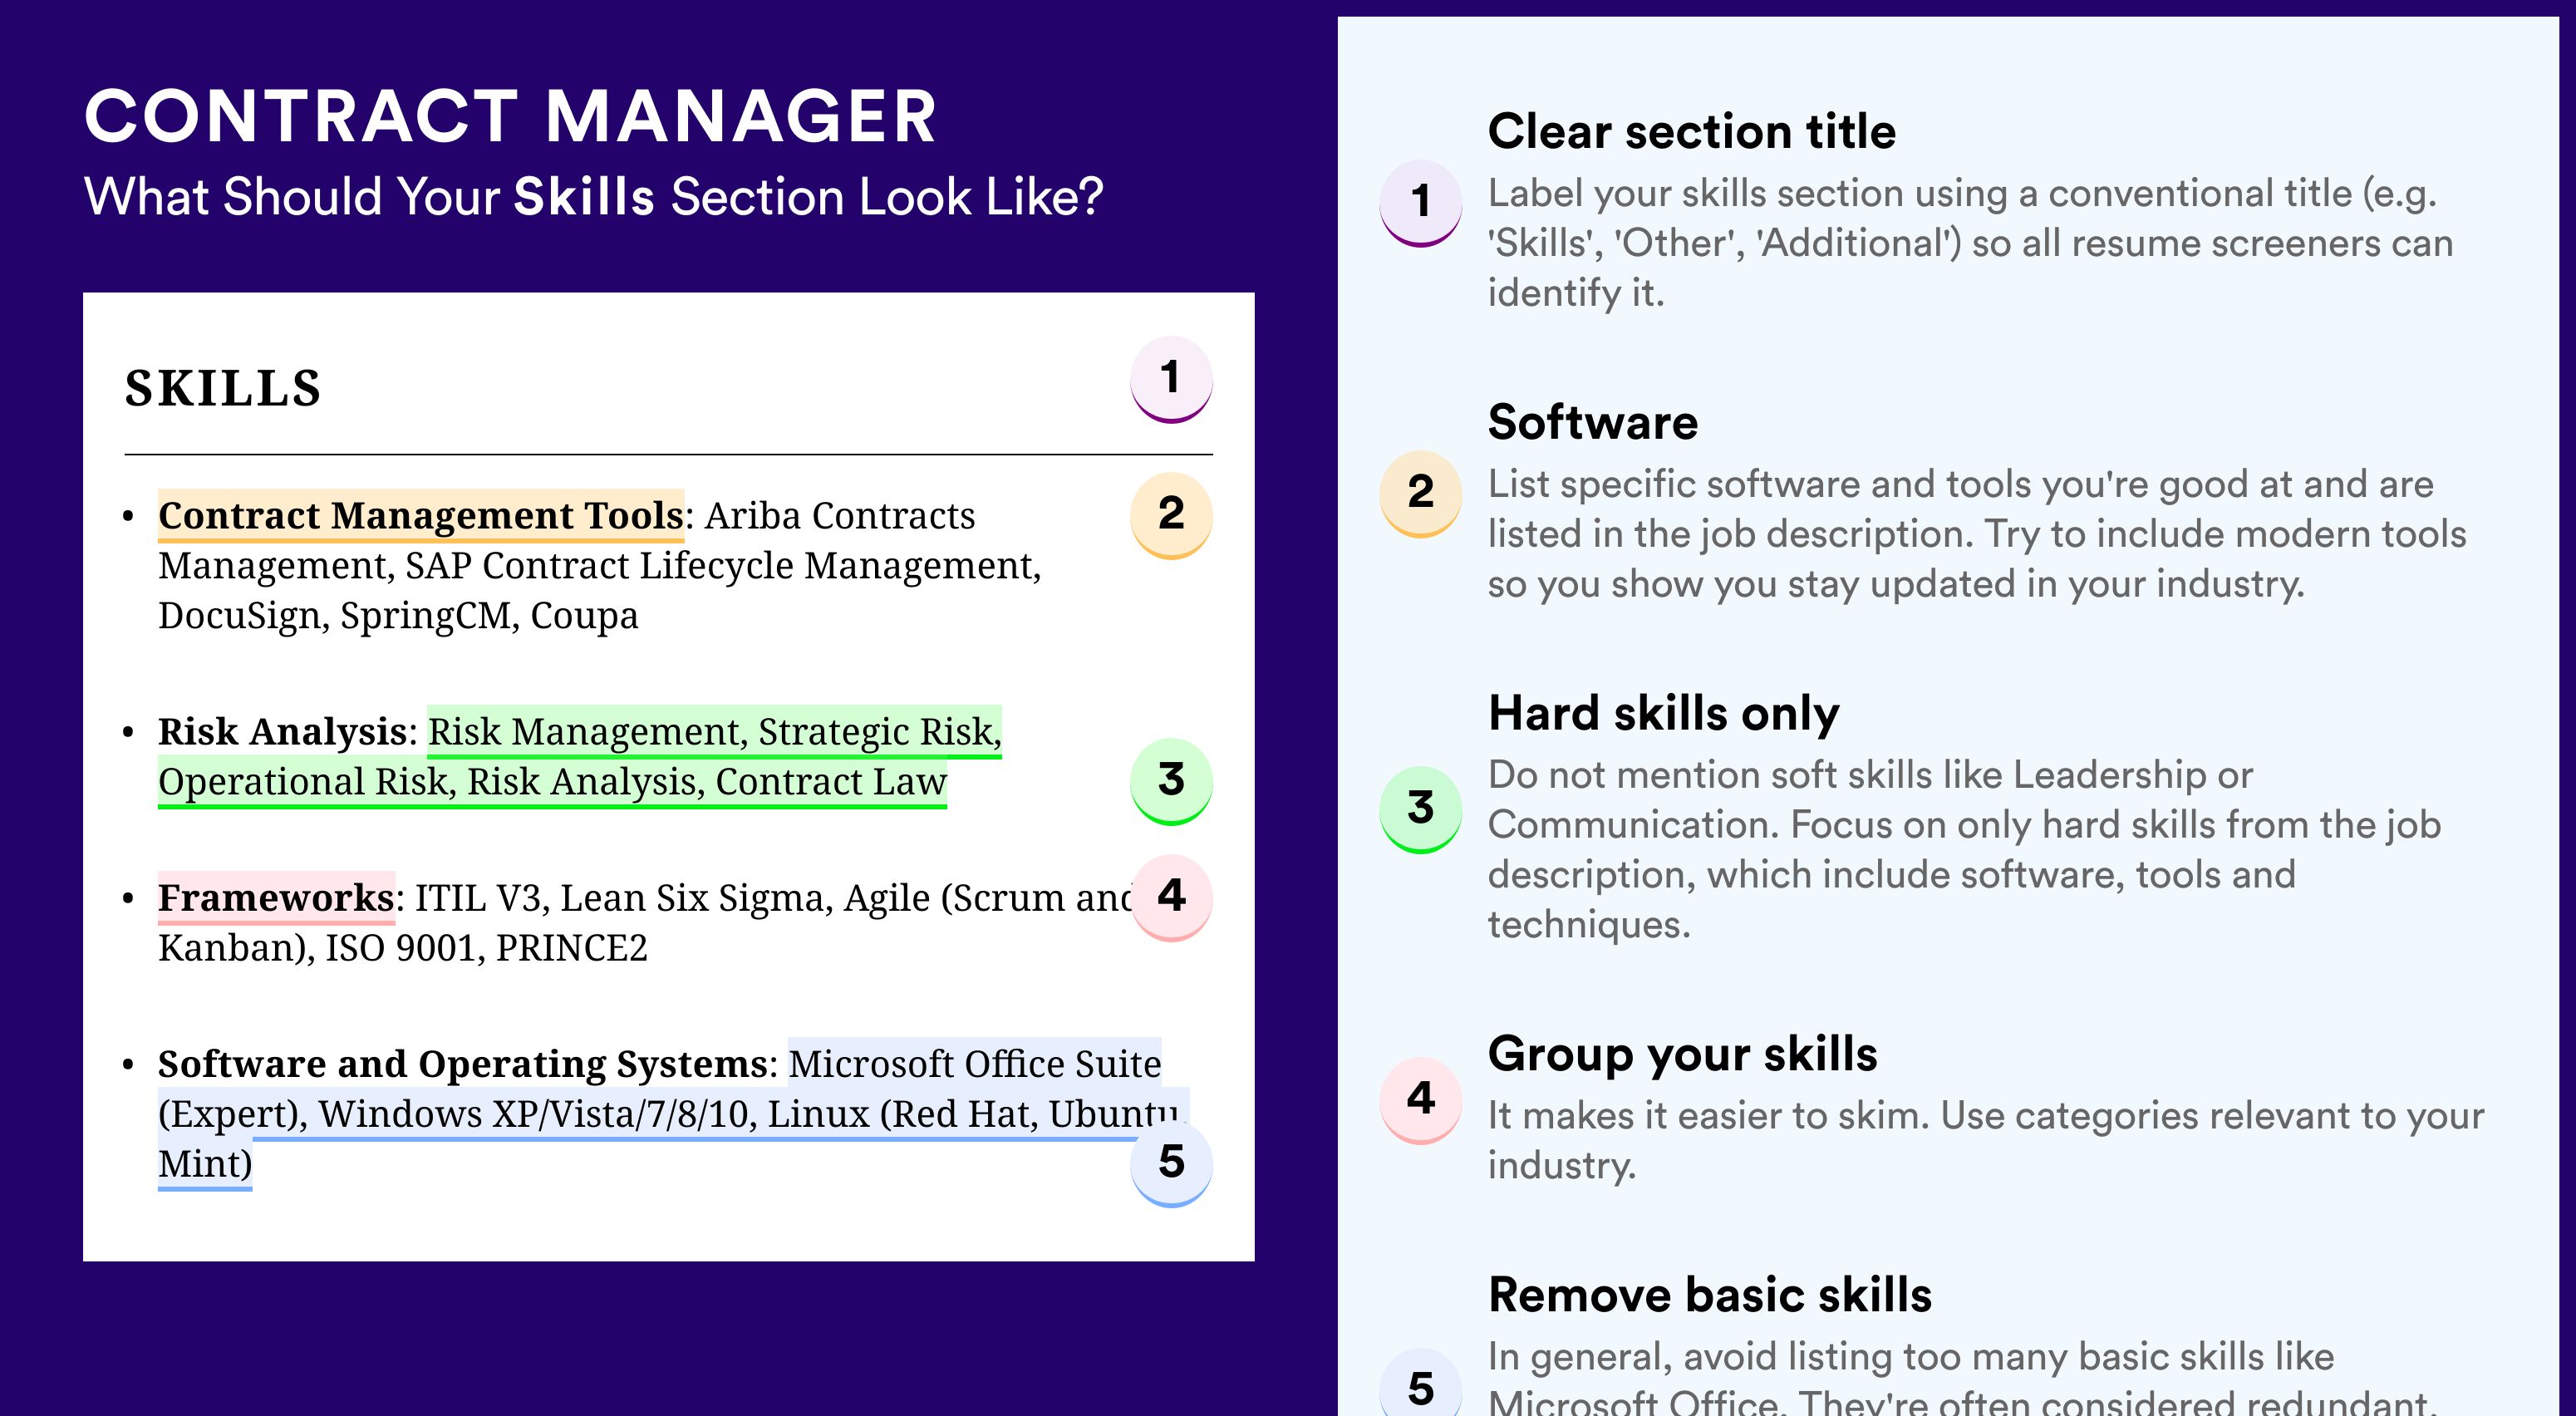 How To Write Your Skills Section - Contract Manager Roles